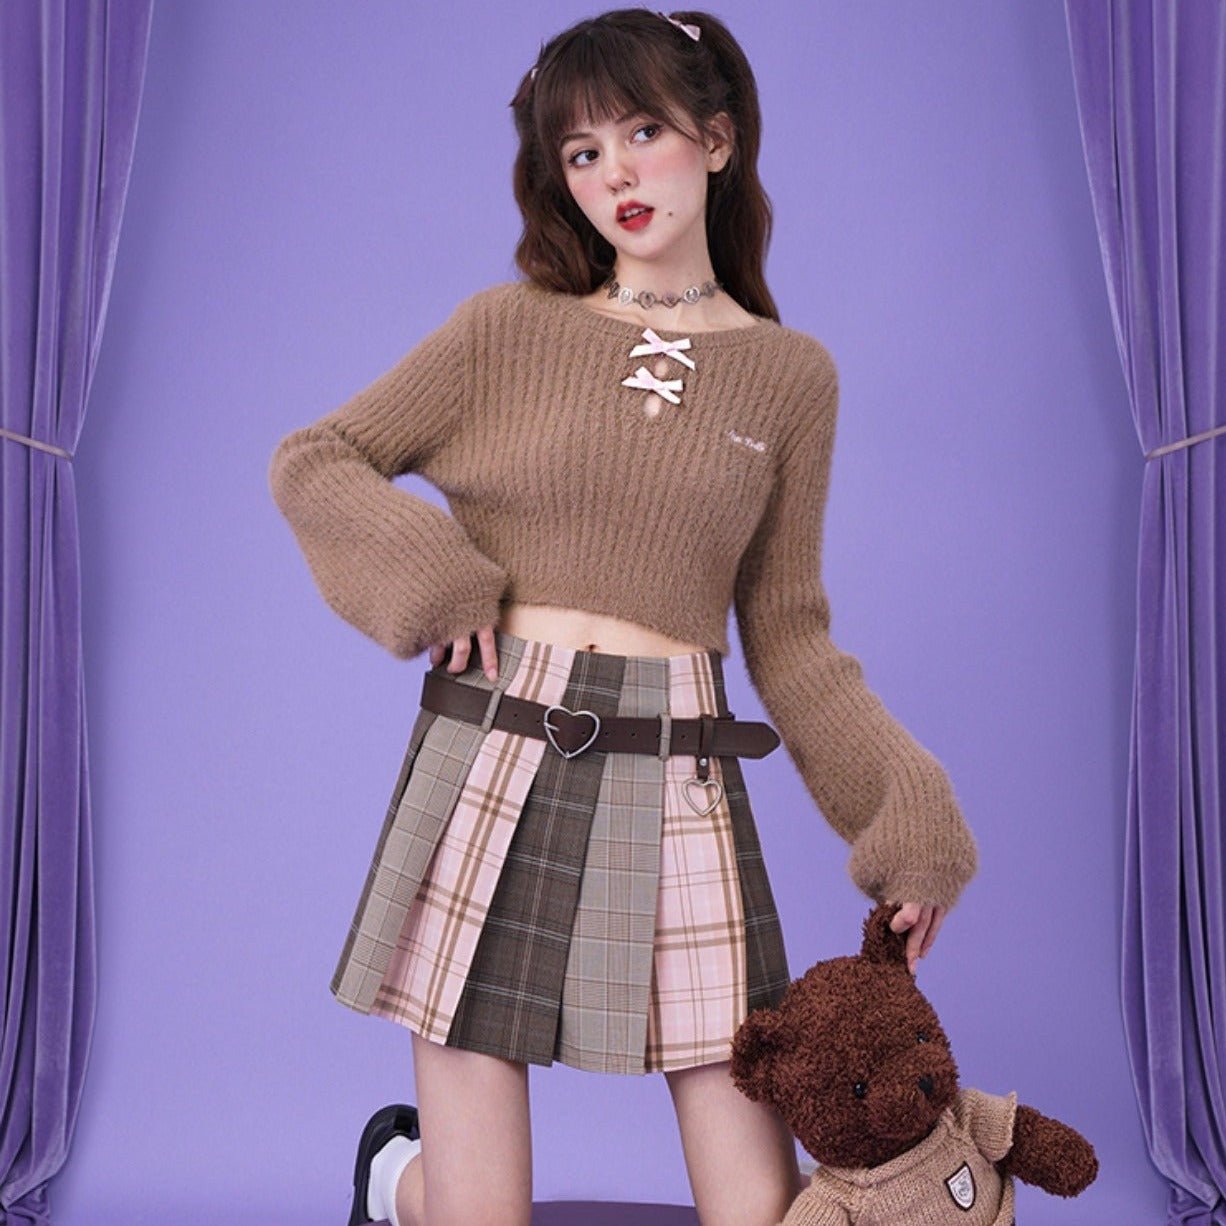 Pink coffee splicing plaid A-line pleated skirt